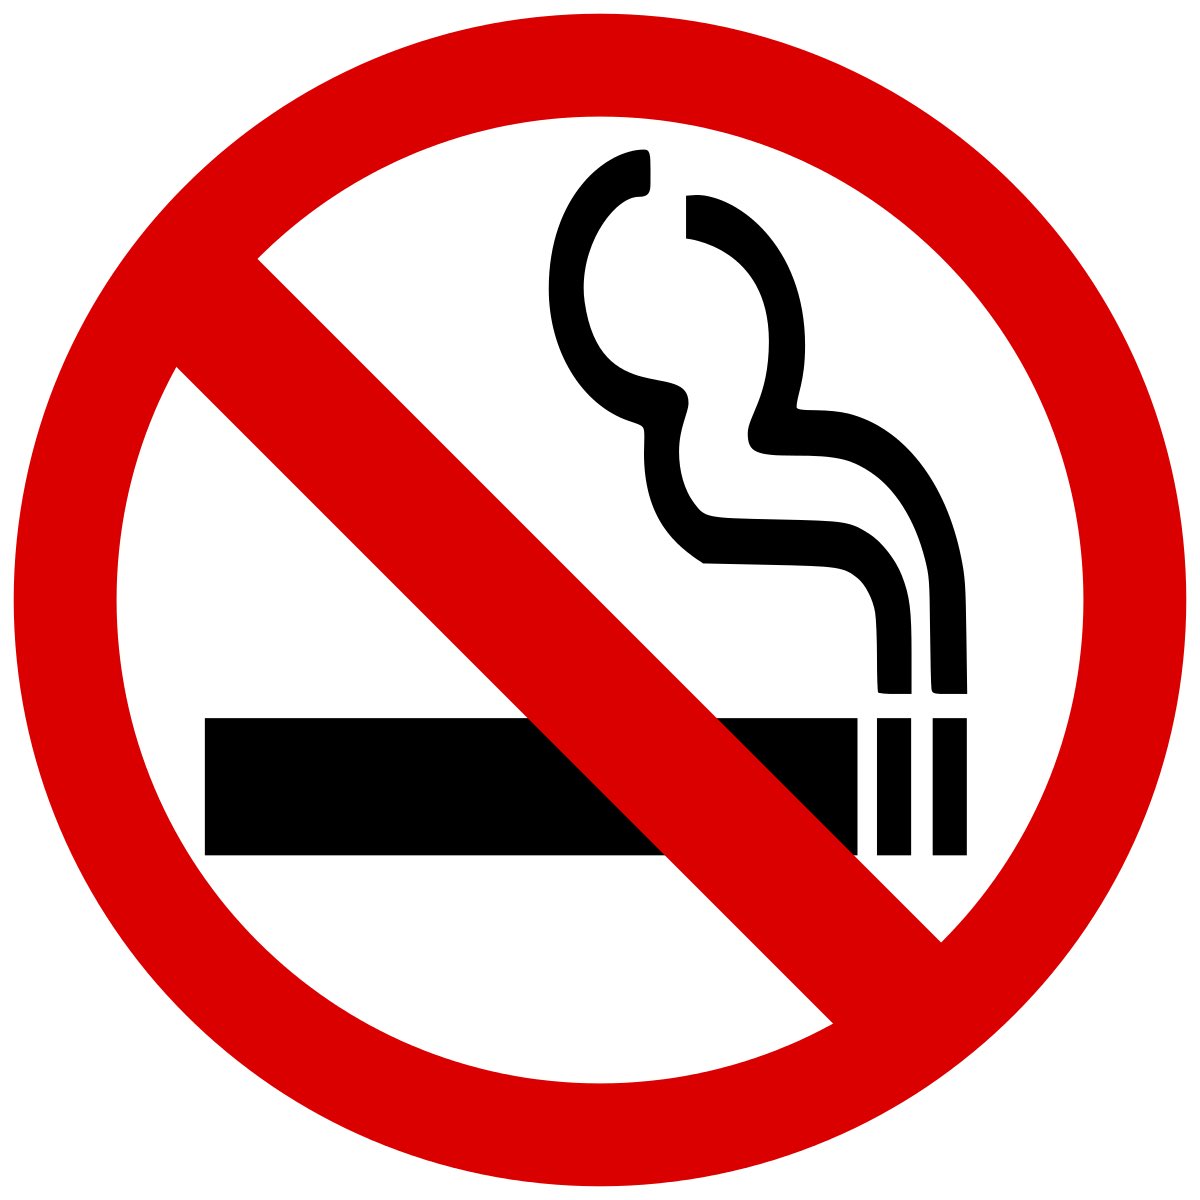 This is a good time to wean yourself off and stop smoking. Since there is no office peer pressure and there is a home environment it is easier to quit. Use a doctor's help to do it effectively. Nicotine patches and gums are helpful.  #saynototobacco